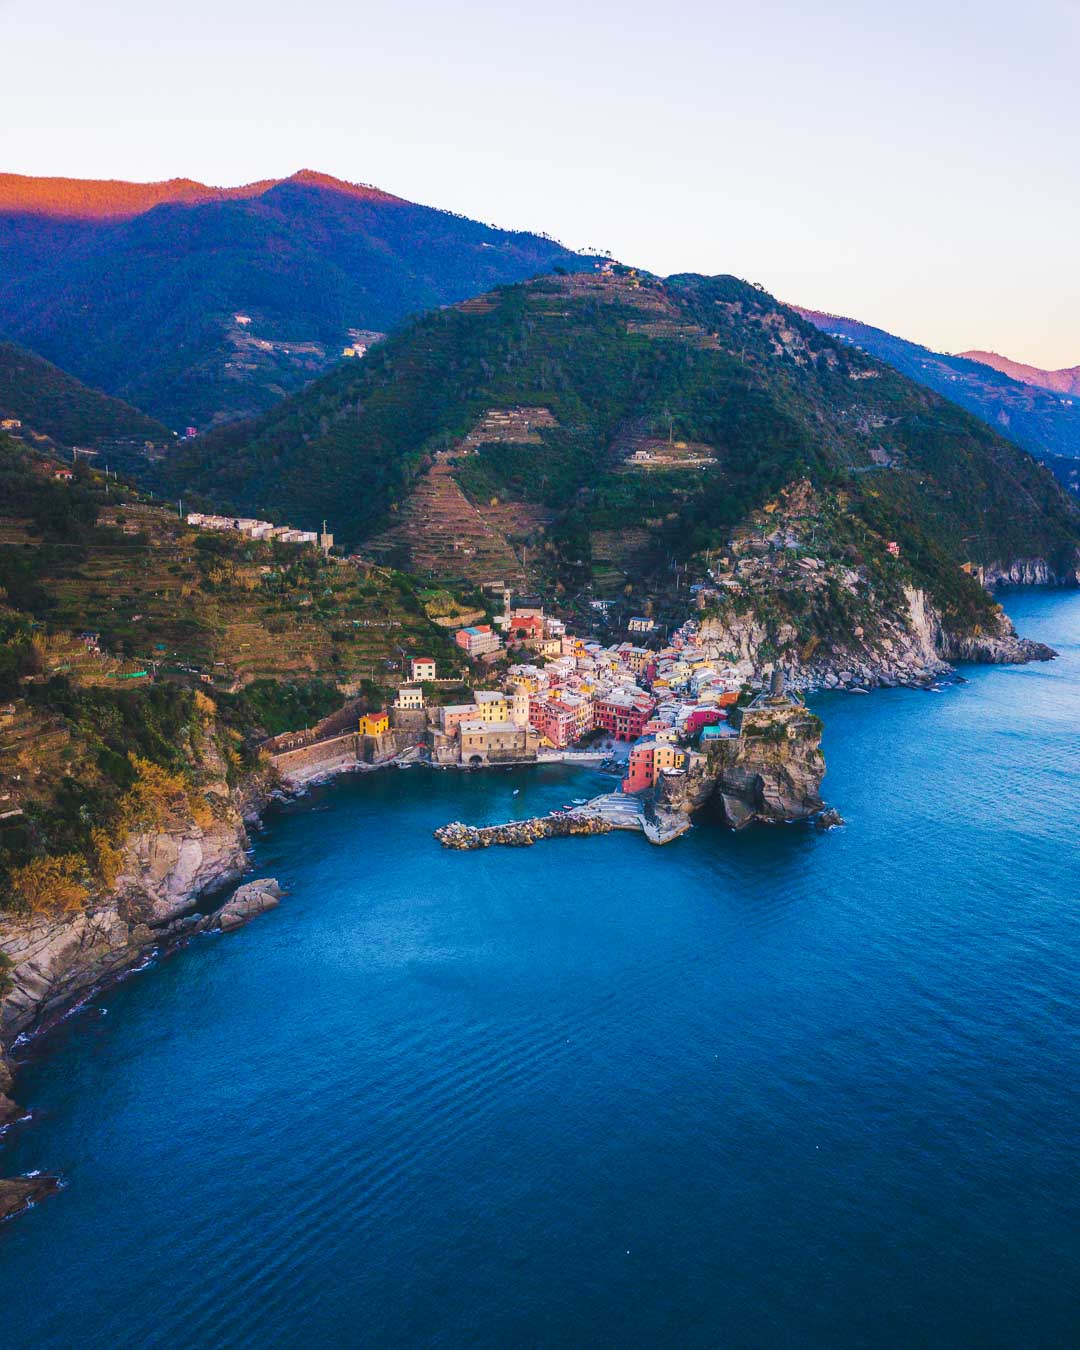 sunset over the mountains of vernazza